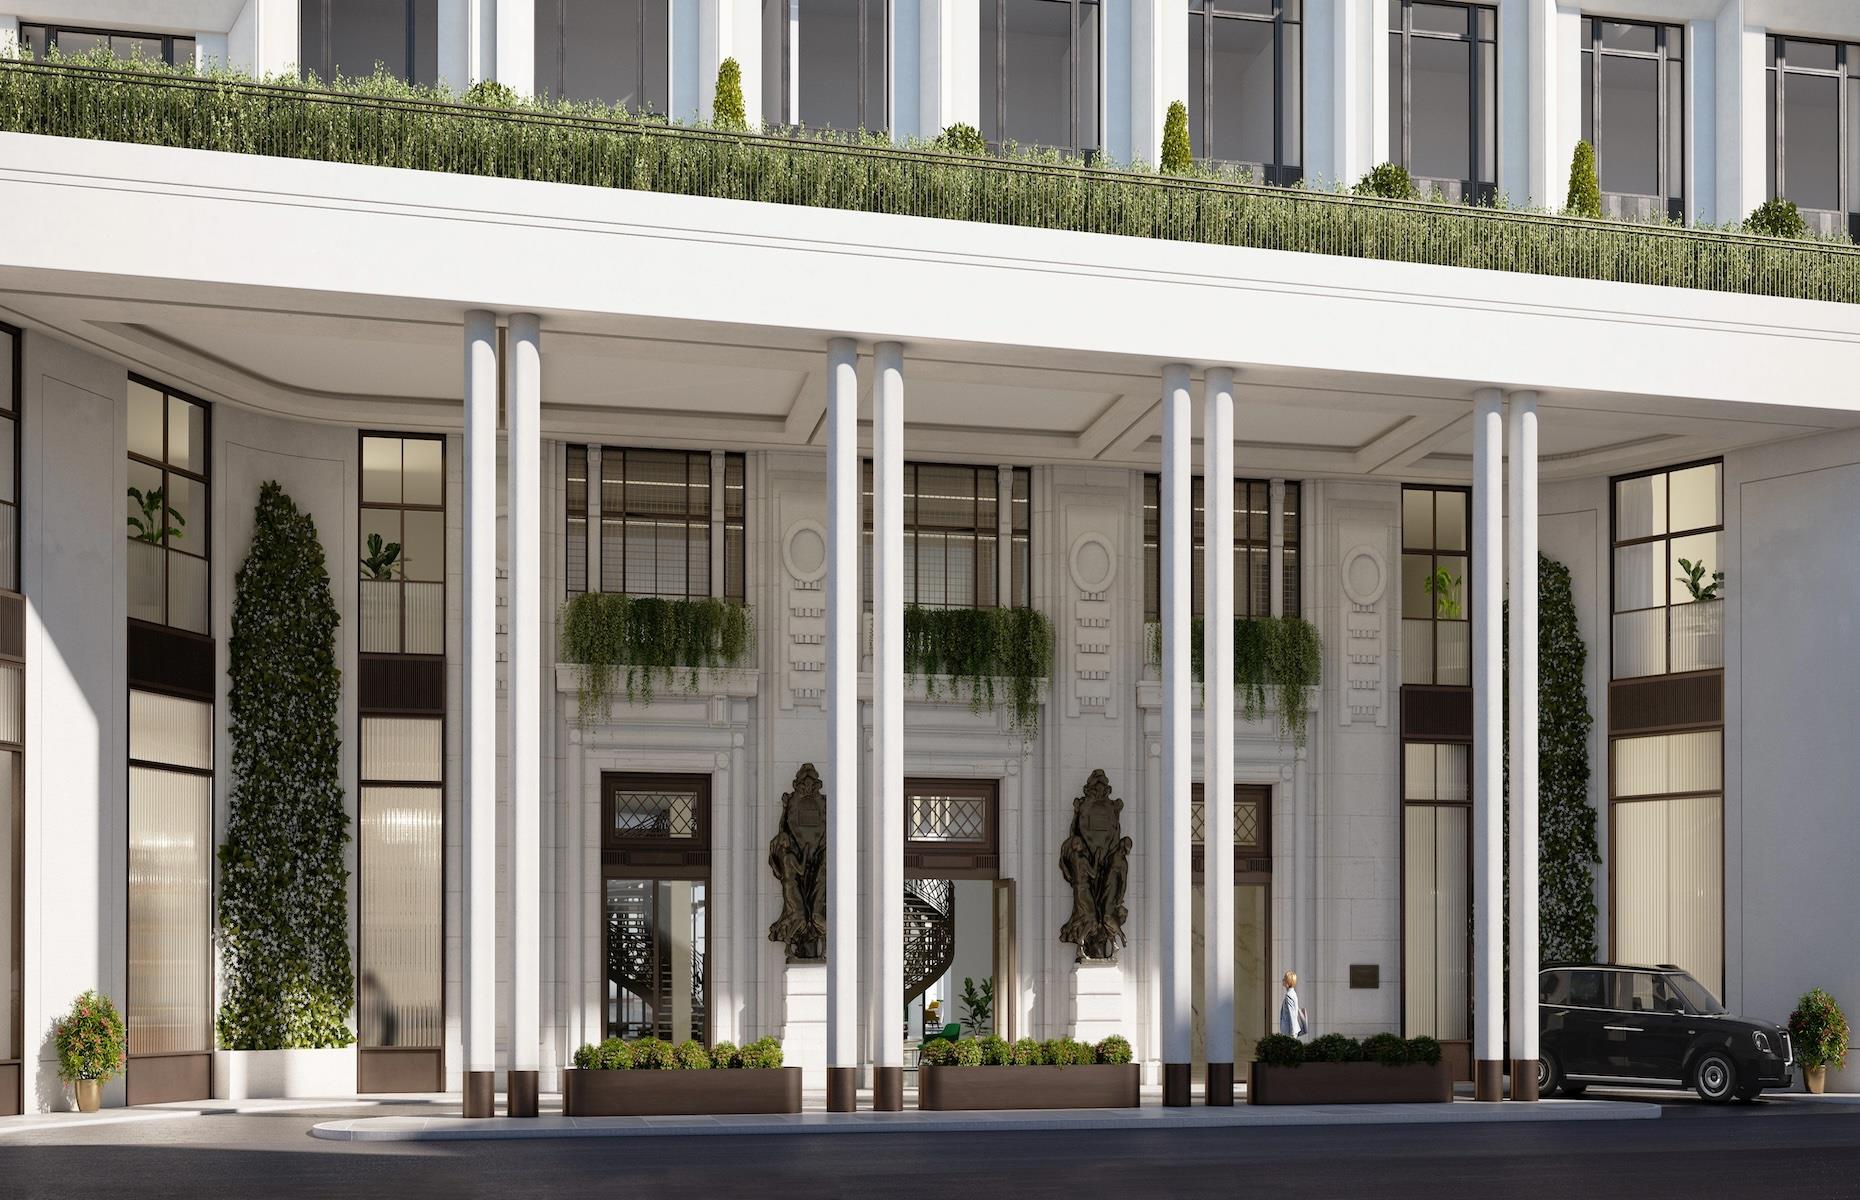 <p>Finally breathing new life into the former Whiteleys department store in Bayswater, Six Senses London will open in early 2024 with 110 rooms and suites, along with 14 branded residences. As part of a £1bn overhaul of the long-since scruffy site, which includes retail and restaurants, the historic bones of the Art Deco landmark remain intact. Below ground the Six Senses Spa, including a large pool, will soothe any city stresses, while Six Senses Place on the second floor will be a social club “where wellness and community meet”.</p>